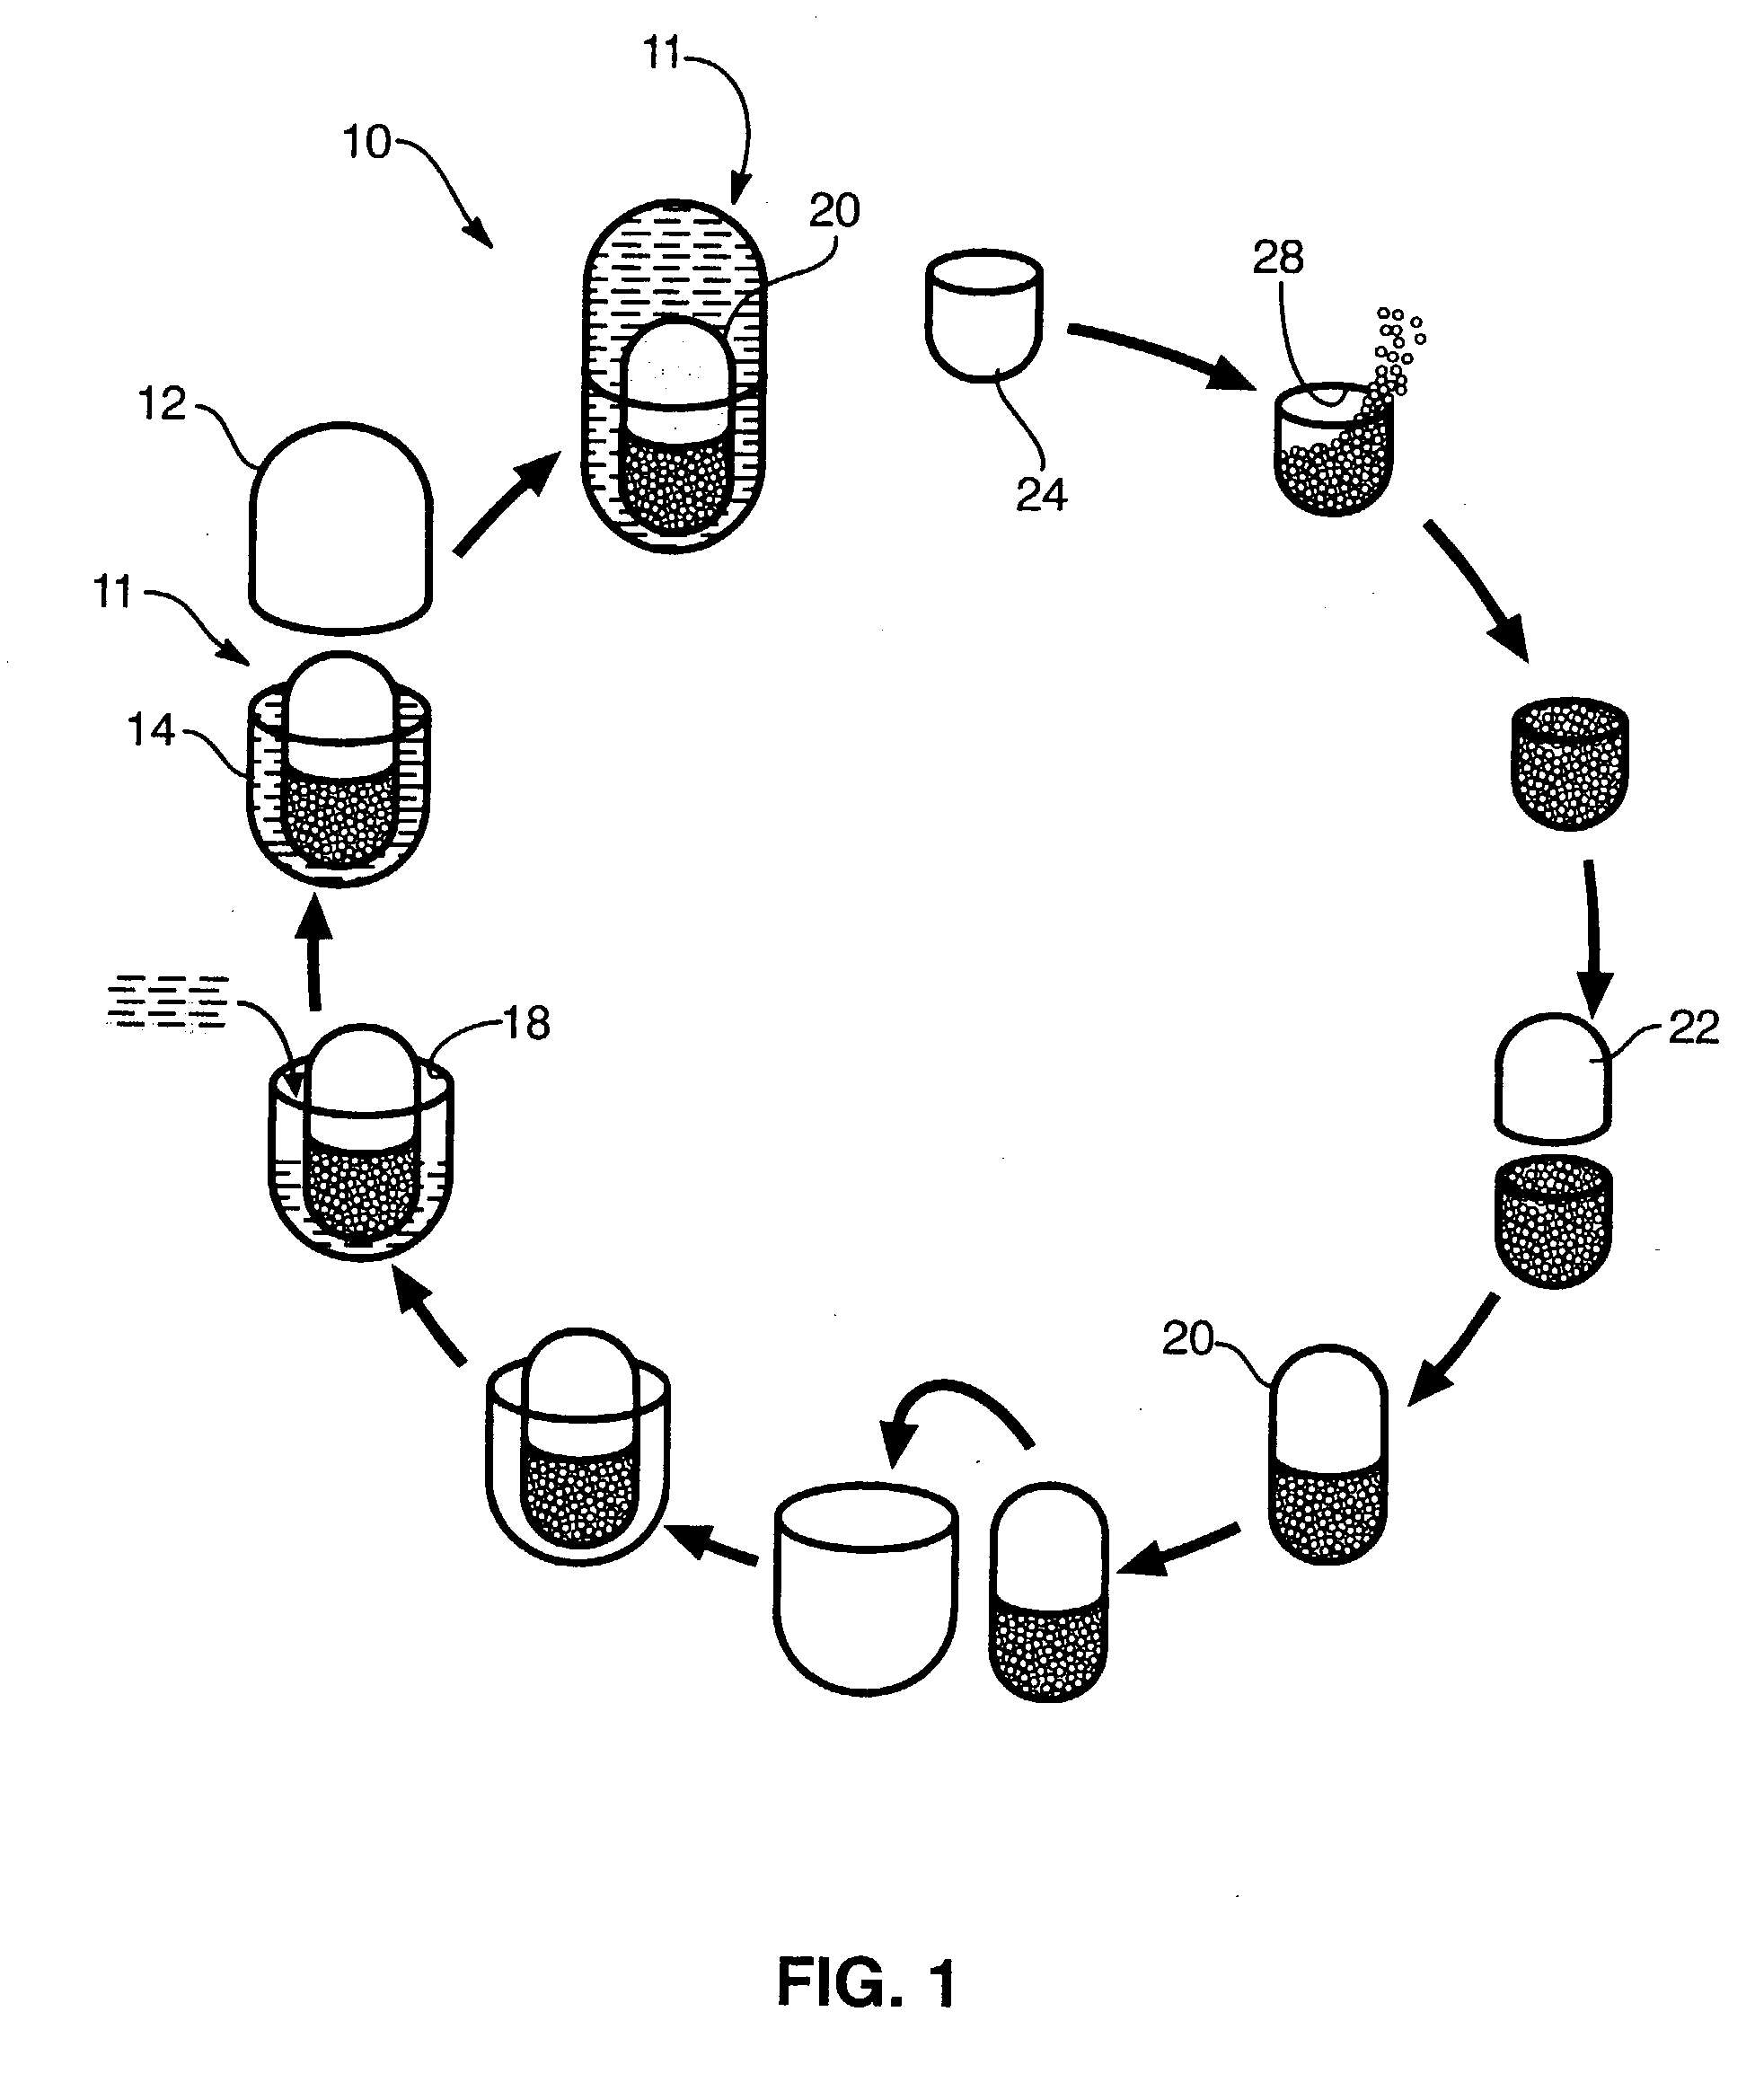 Process for encapsulating multi-phase, multi-compartment capsules for therapeutic compositions